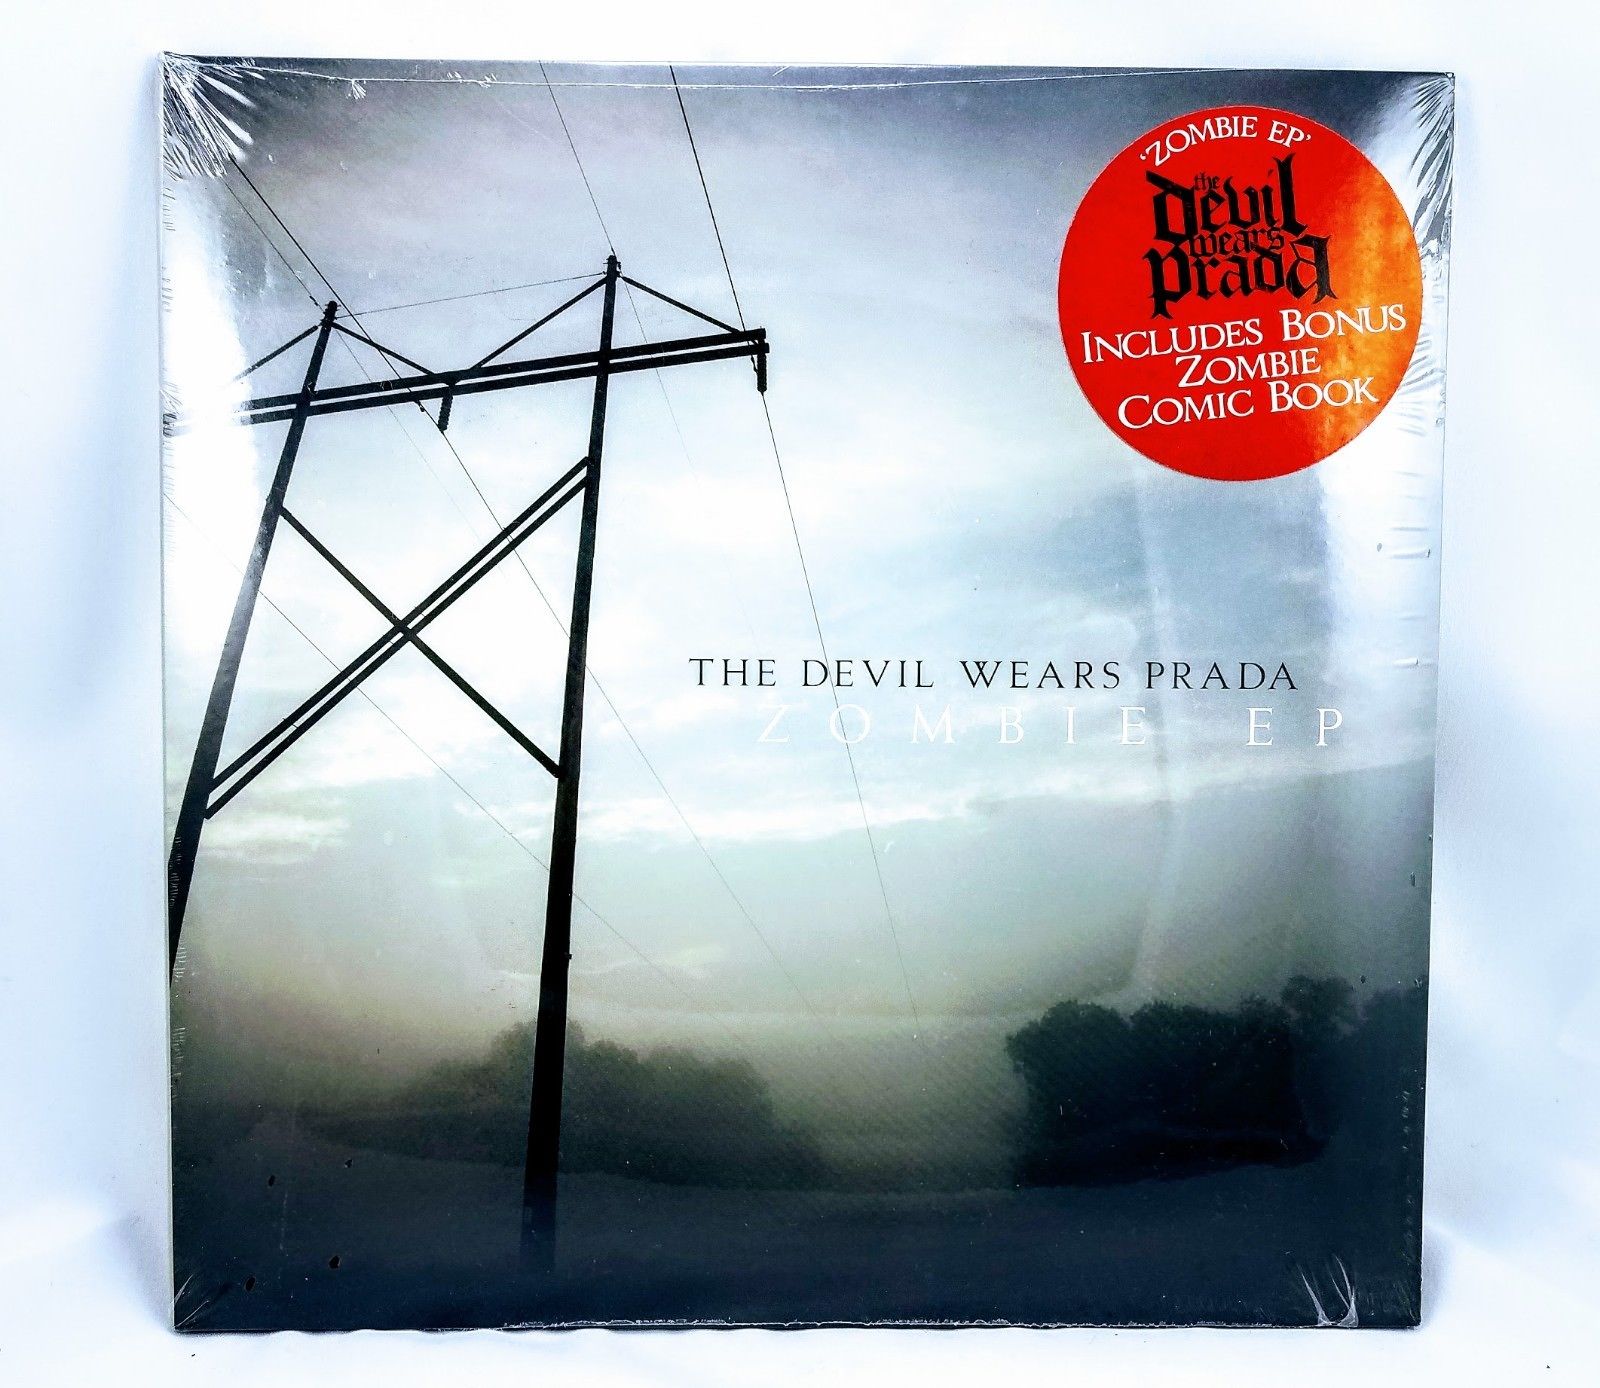 popsike.com - The Devil Wears Prada Zombie EP Vinyl Record Grey Marble TDWP  Limited OOP Sealed - auction details